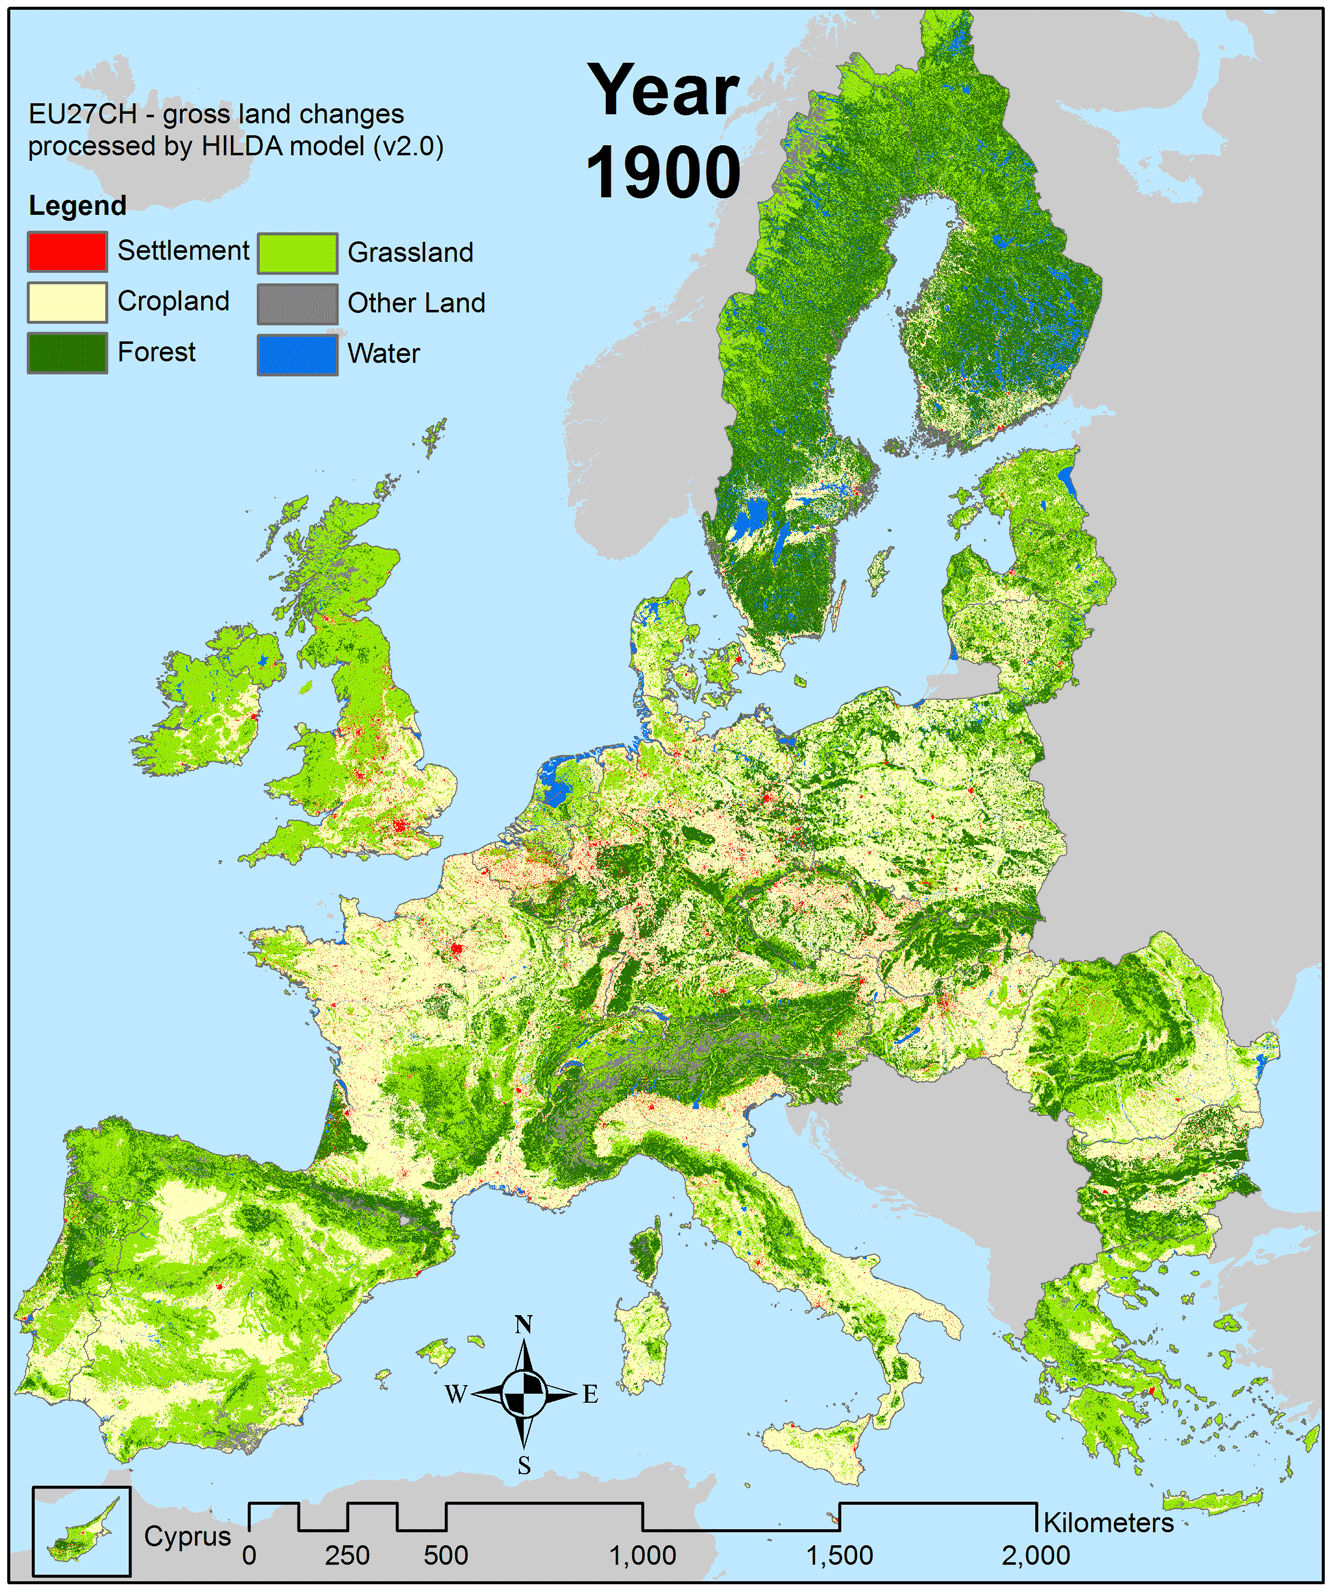 Europe grossland changes, 1900-2010